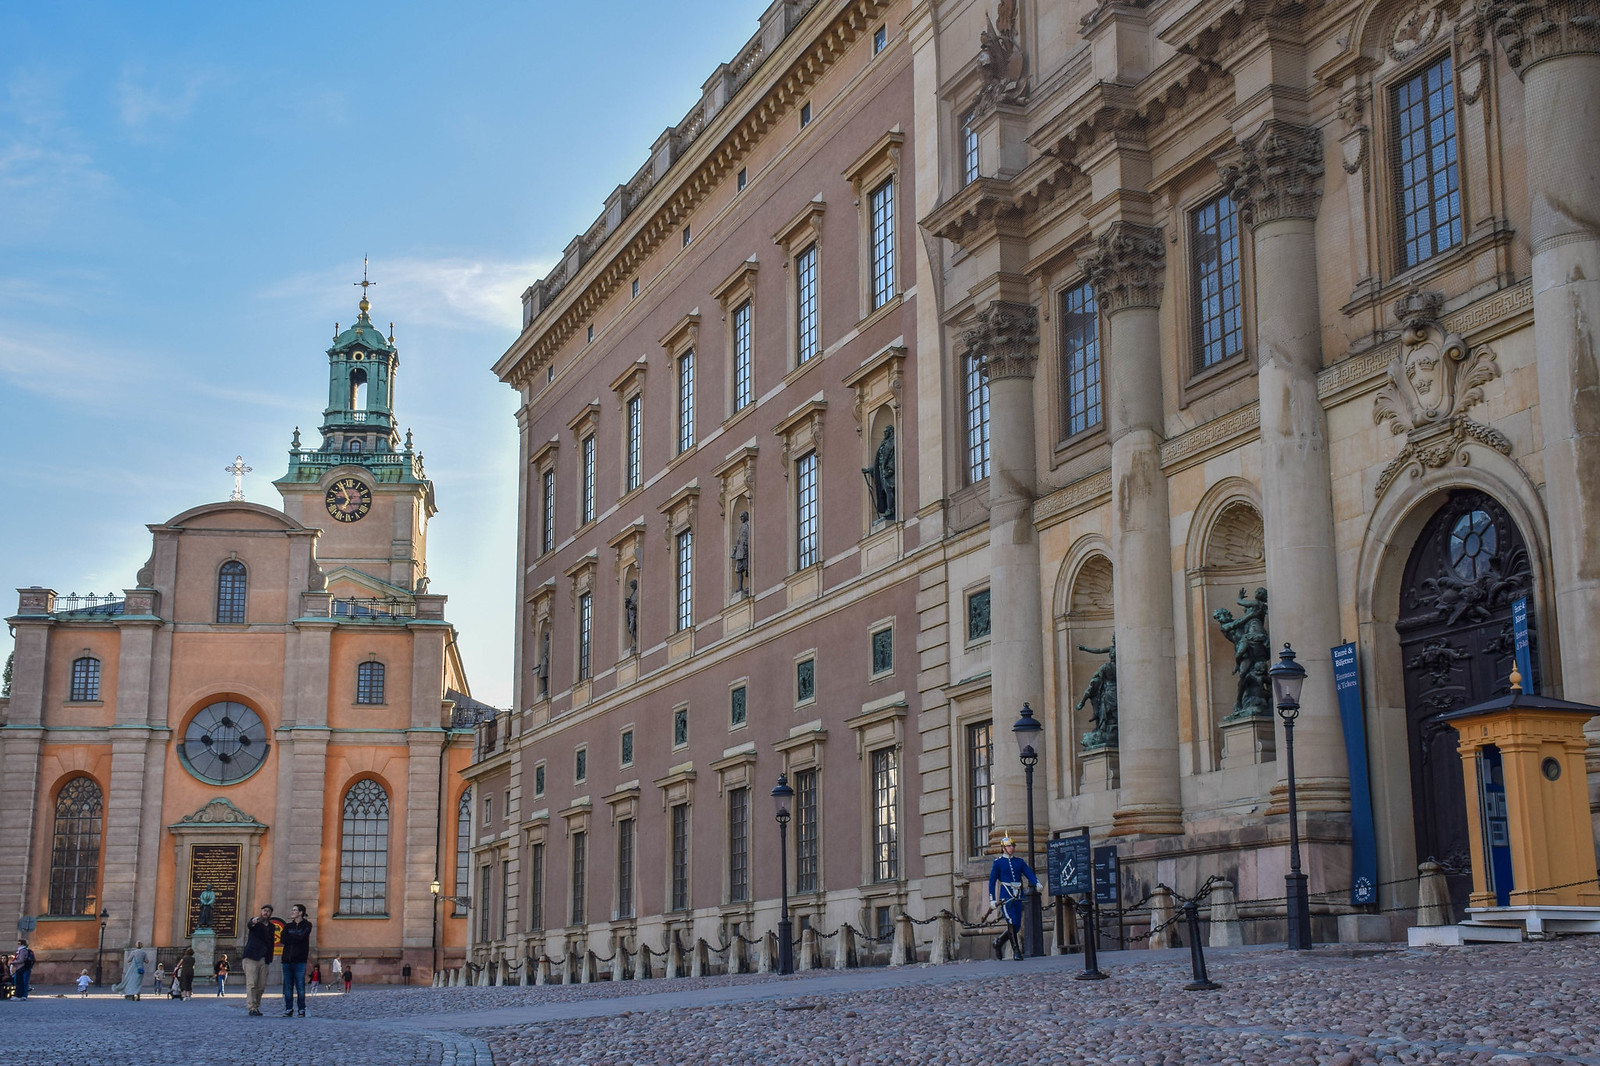 The Royal Palace of Stockholm in Old Town